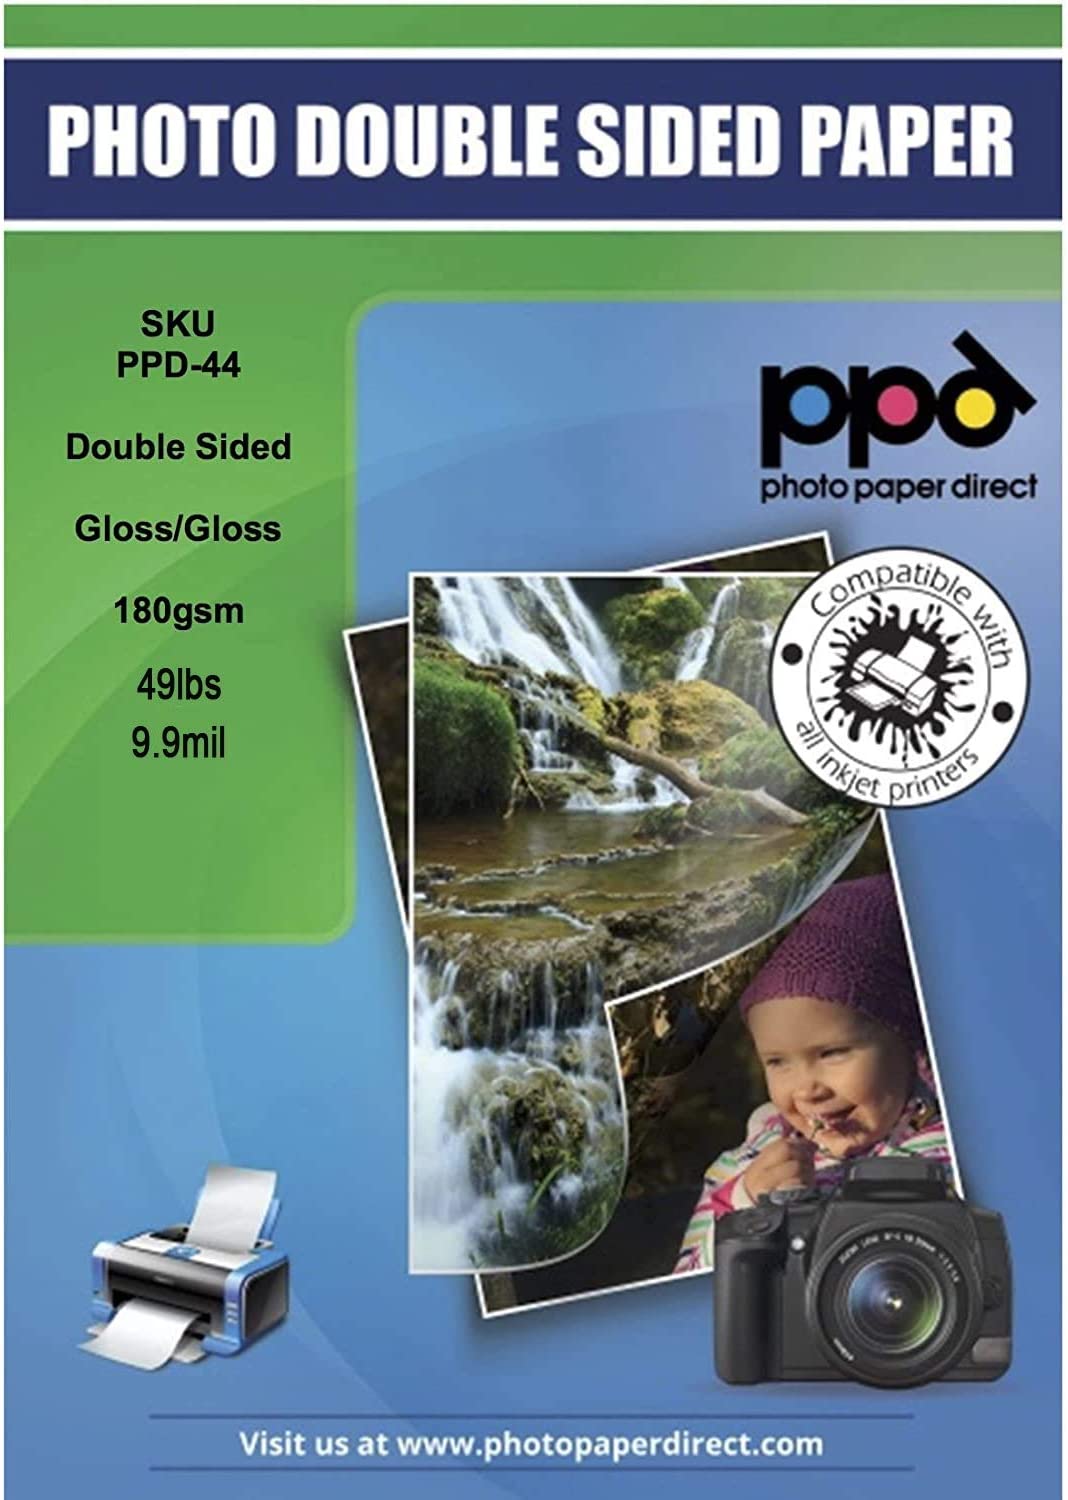 Inkjet Photo Paper Double Sided Gloss/Gloss 49lb. 180gsm 9.9mil 8.5x11" PPD-44